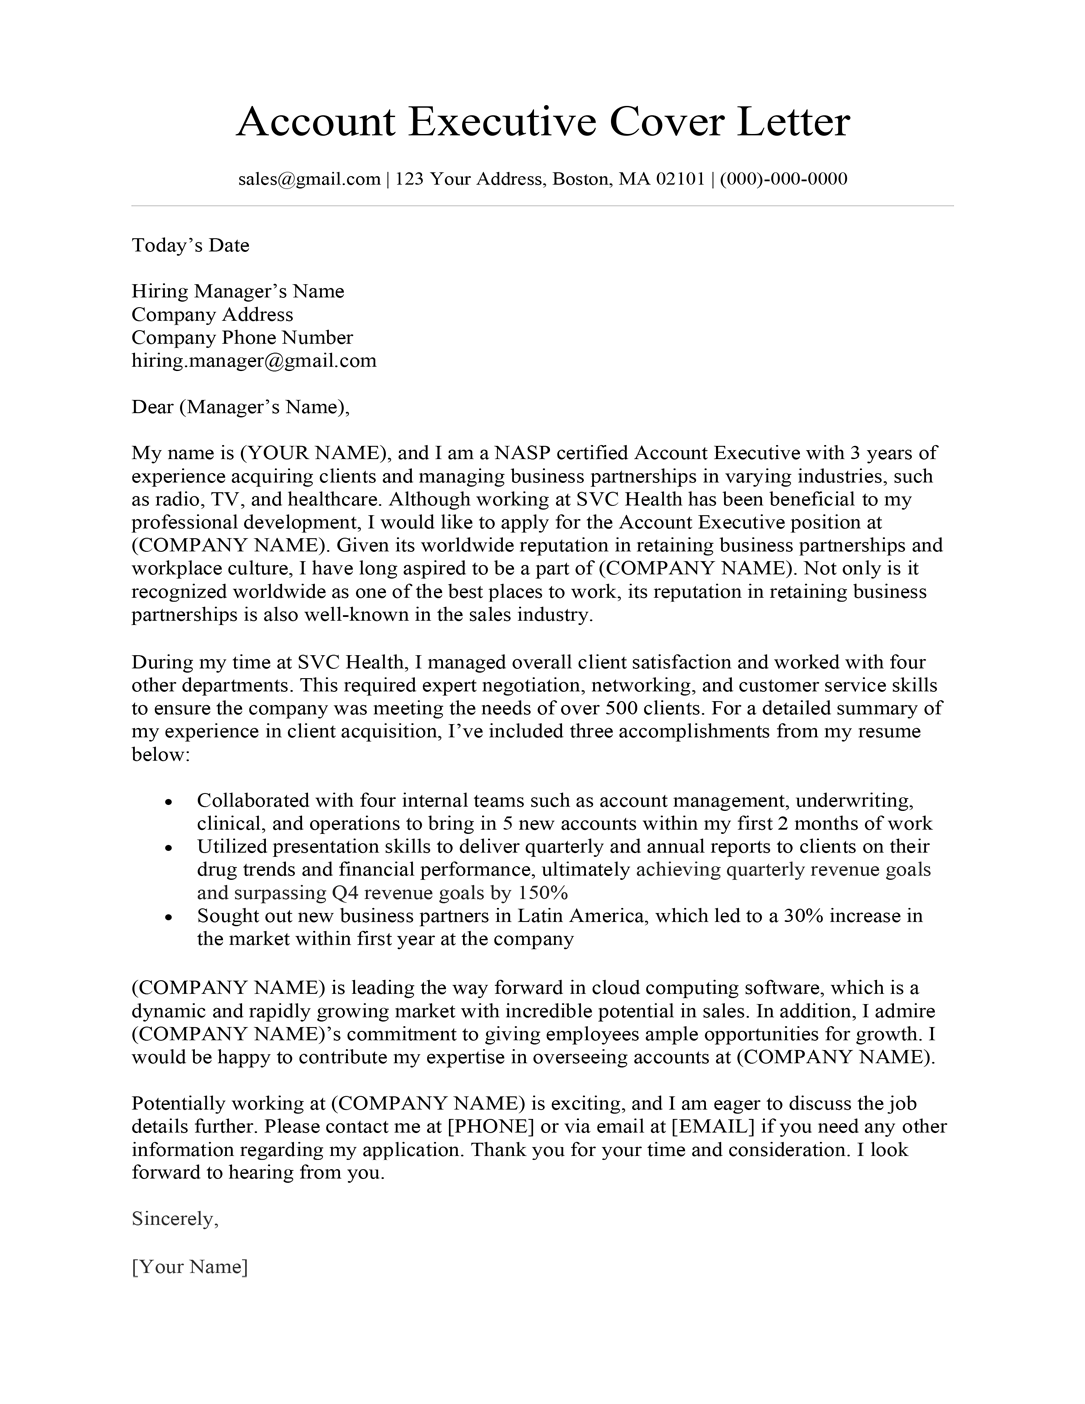 Account executive cover letter sample